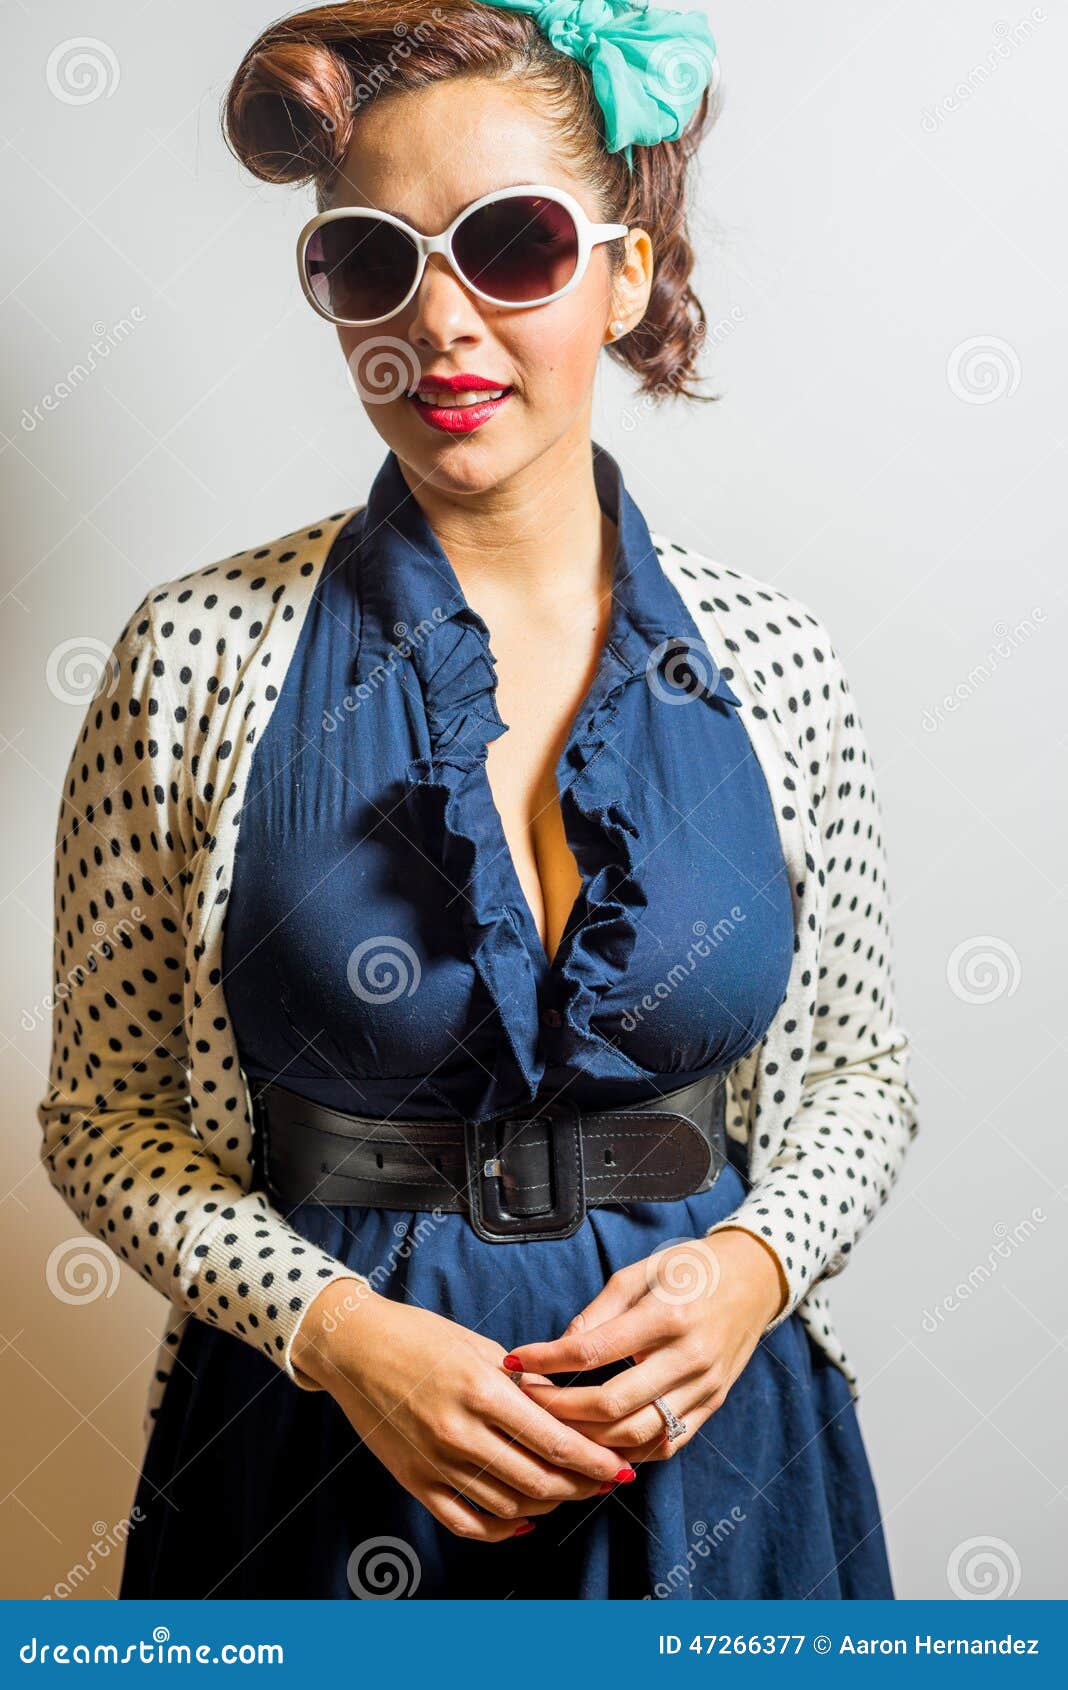 Glamorous Pretty Female in Rockabilly Style Stock Image - Image of